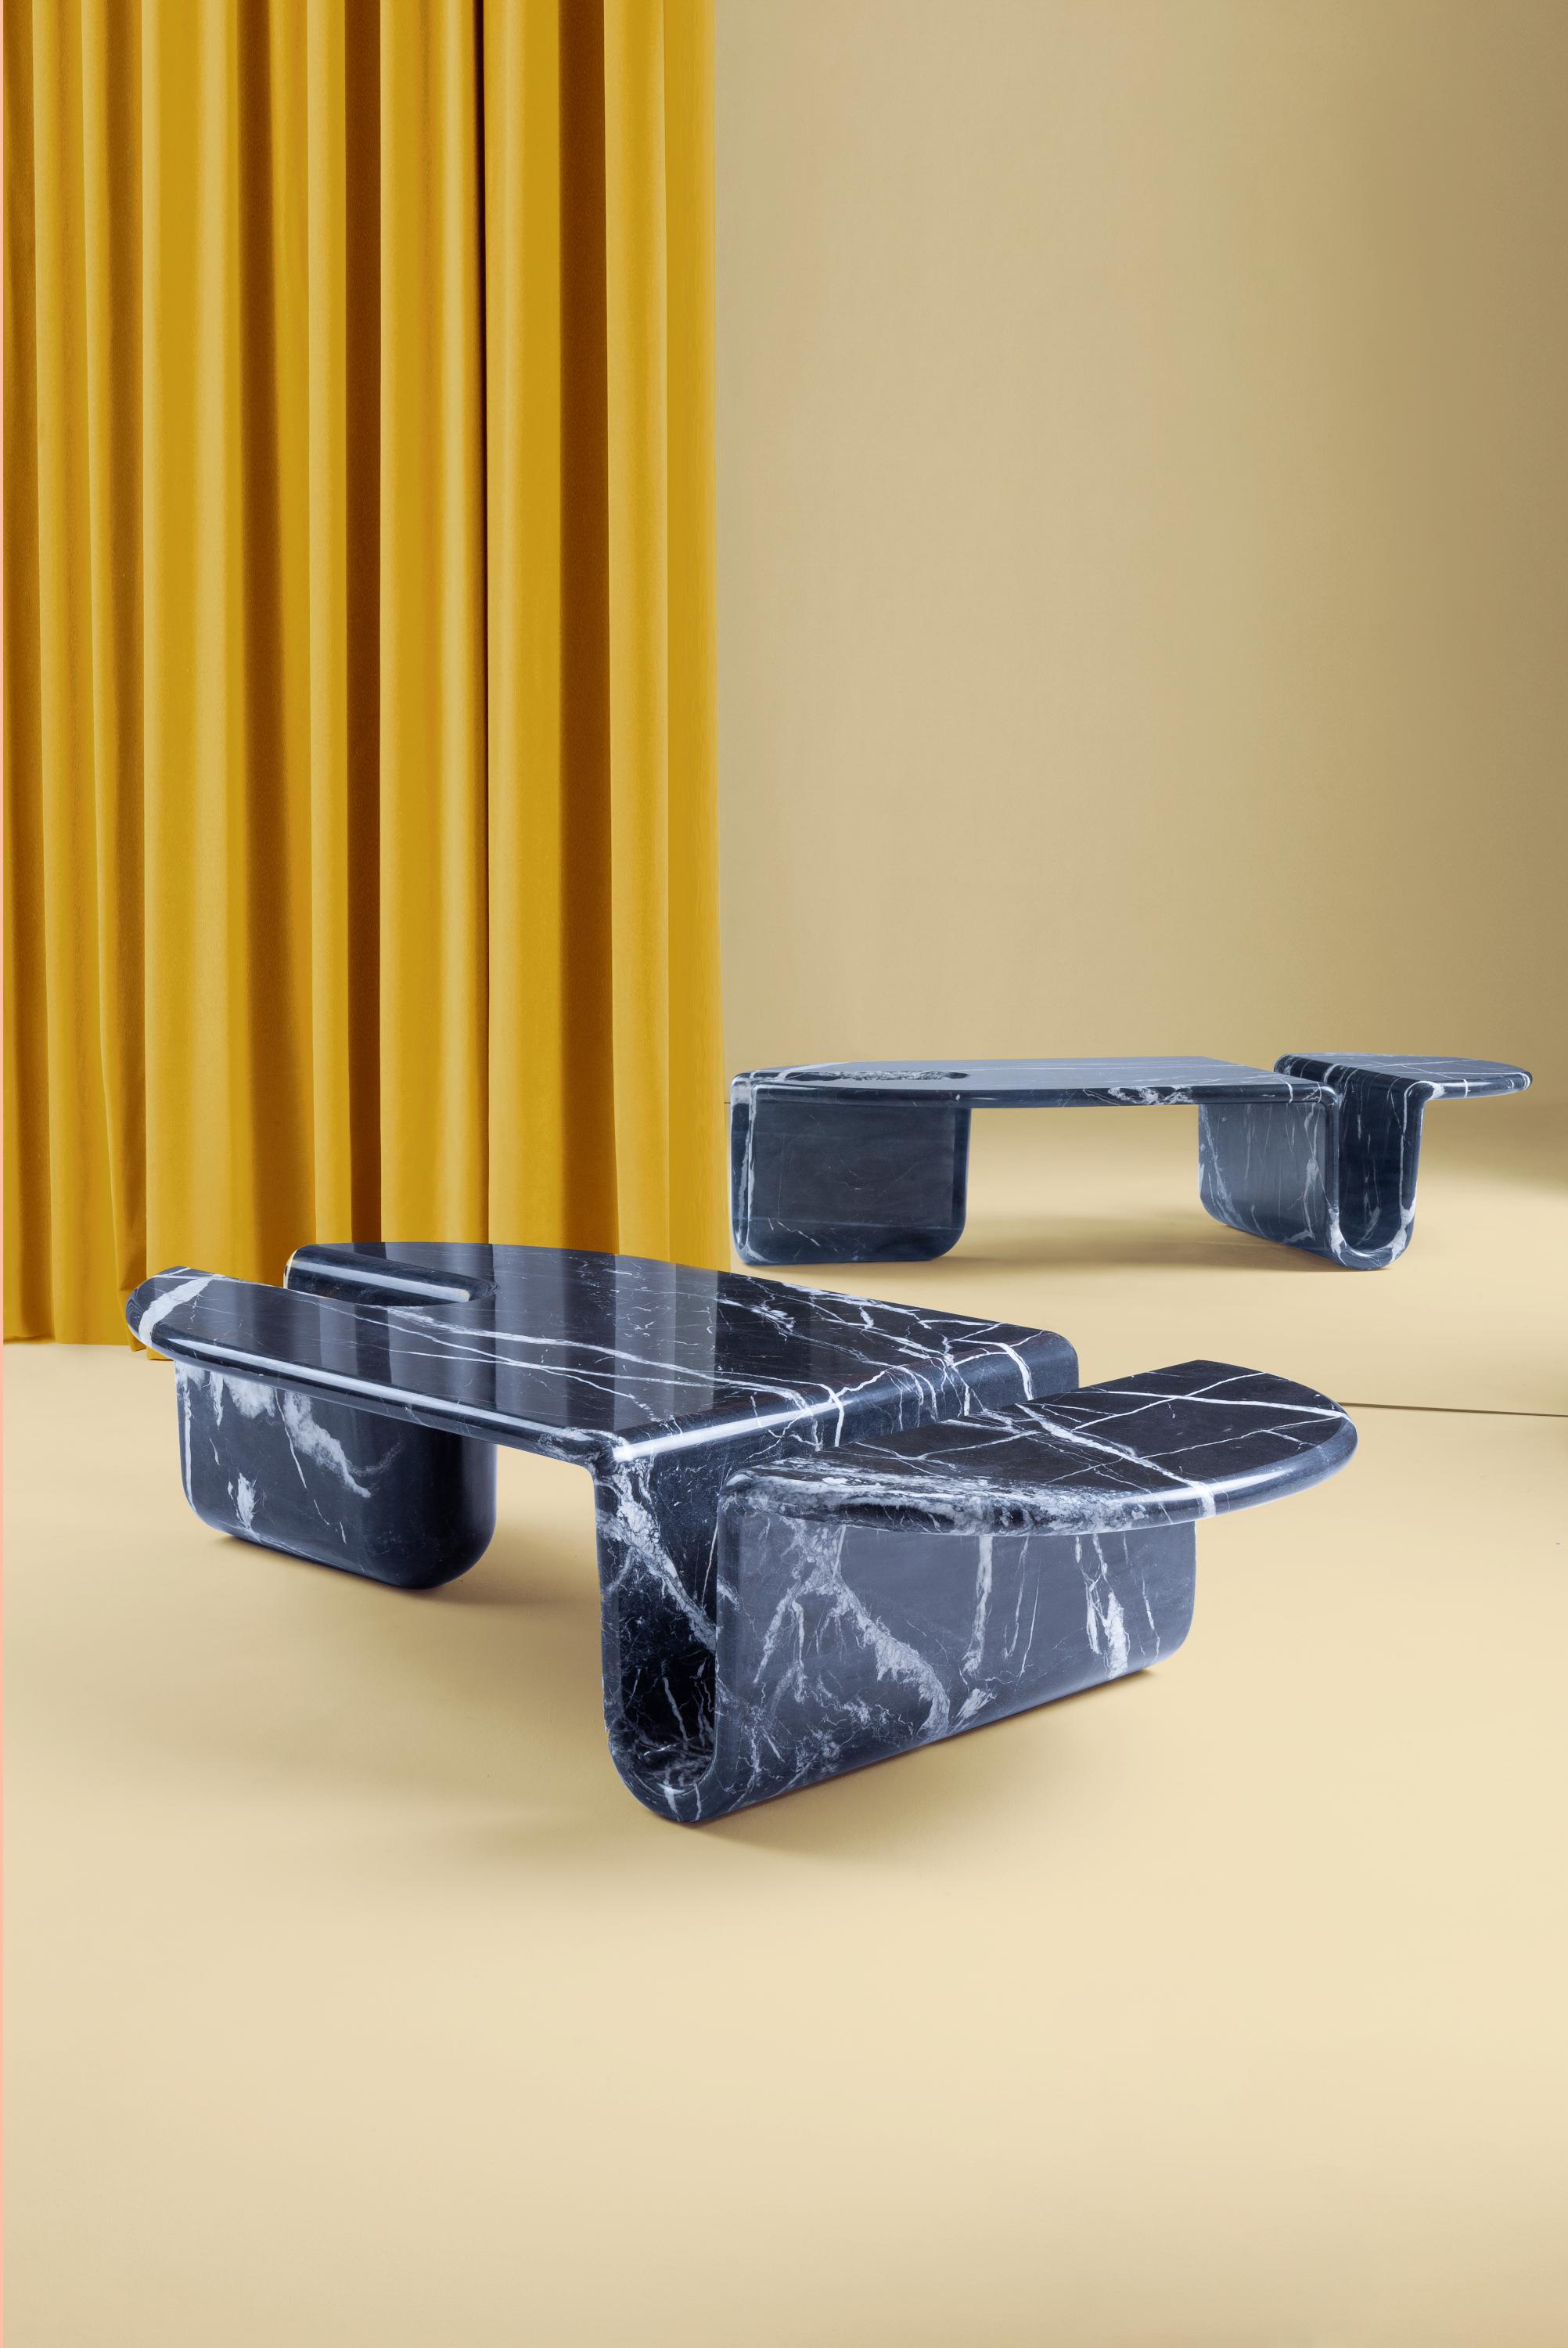 Modern Bonnie & Clyde Nero Marquina Marble Center Table by Dooq